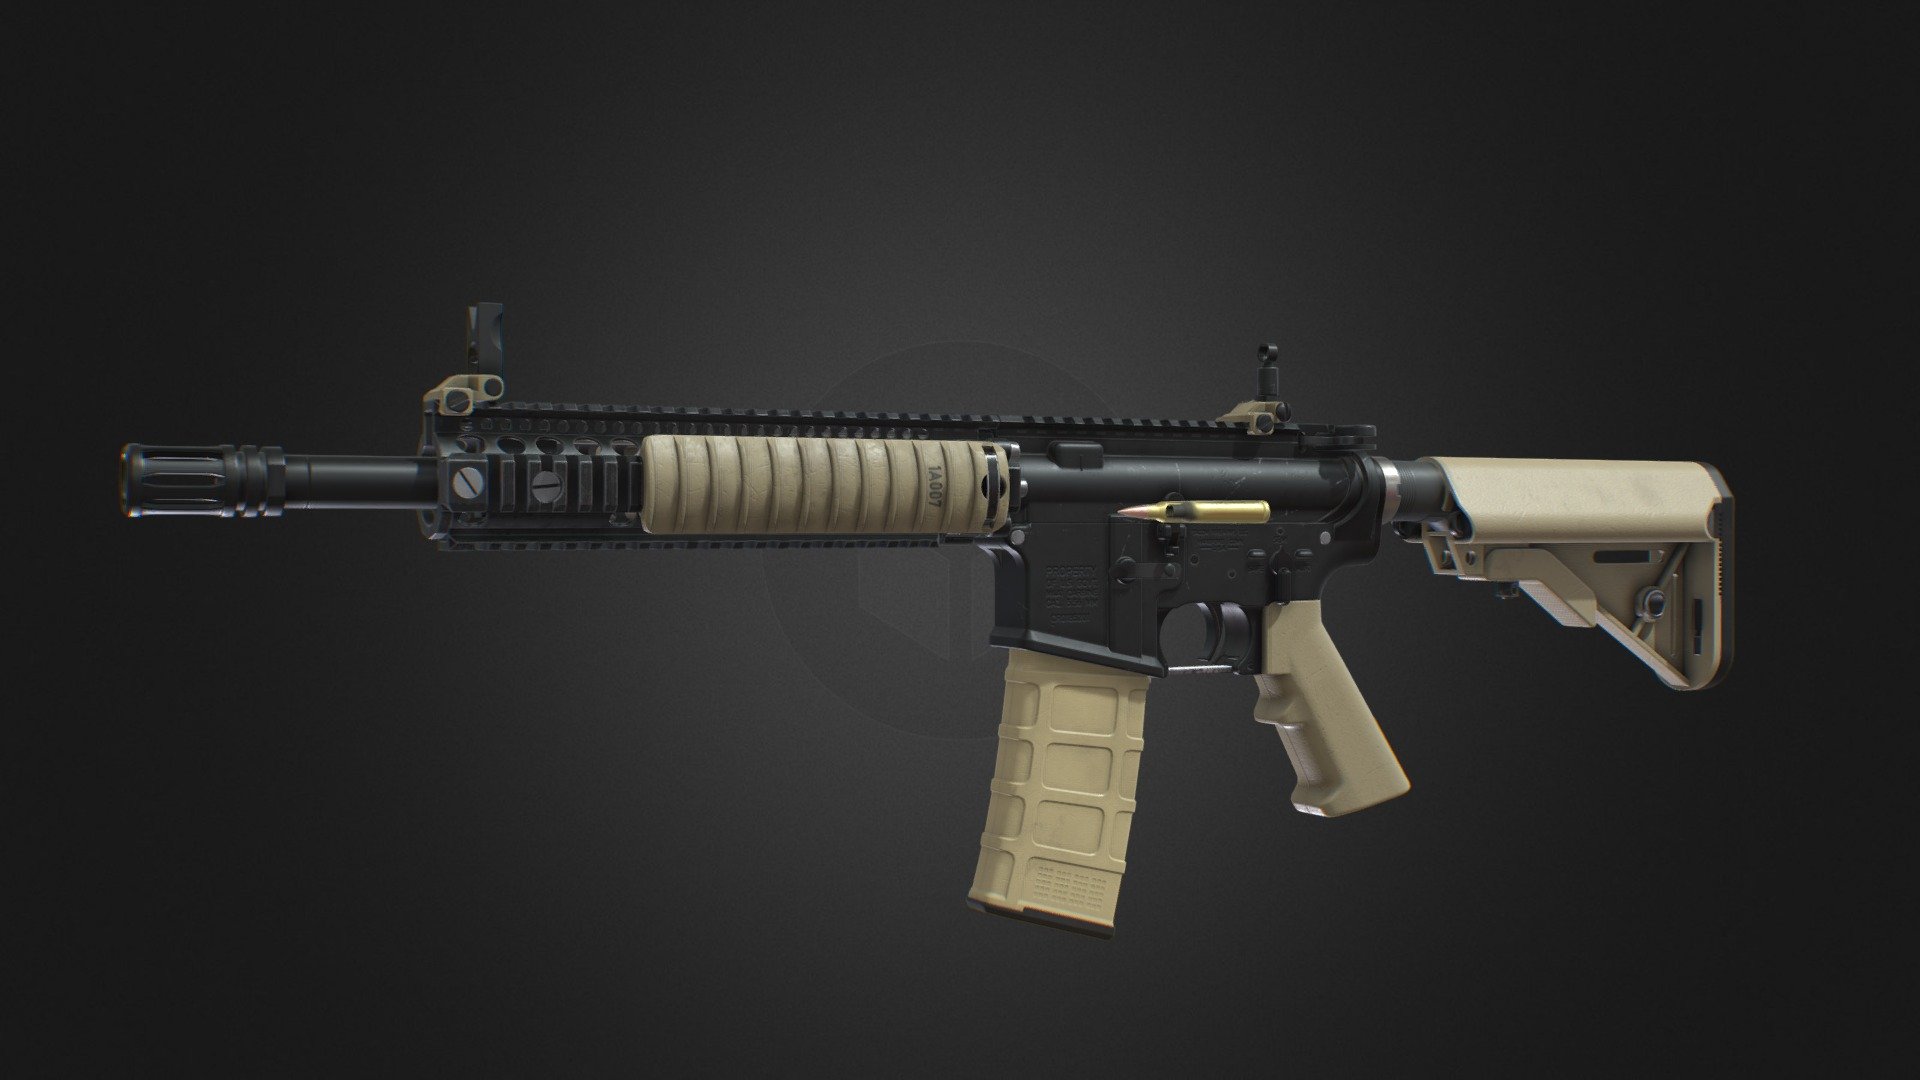 Model - Is a game ready asset to be used in any fps or other type of game project. Simular to the one used in modern warefare 2019 the mk18 mode 1 is a real word variant of an AR15 used by the U.S. military.

Textures - Model is textured with 5 different 2k PBR materials in PNG format.
Materials: (Base color, Metallness, Roughness, AO and Normal Open GL)
Textured in substance painter/marmoset toolbag 4

Meshes - All meshes are available in .fbx format.

If you have any question email me at - nickolasa.mcintosh@gmail.com - Modern Warefare M4A1 - Download Free 3D model by Nneako (@nickolasa.mcintosh) 3d model